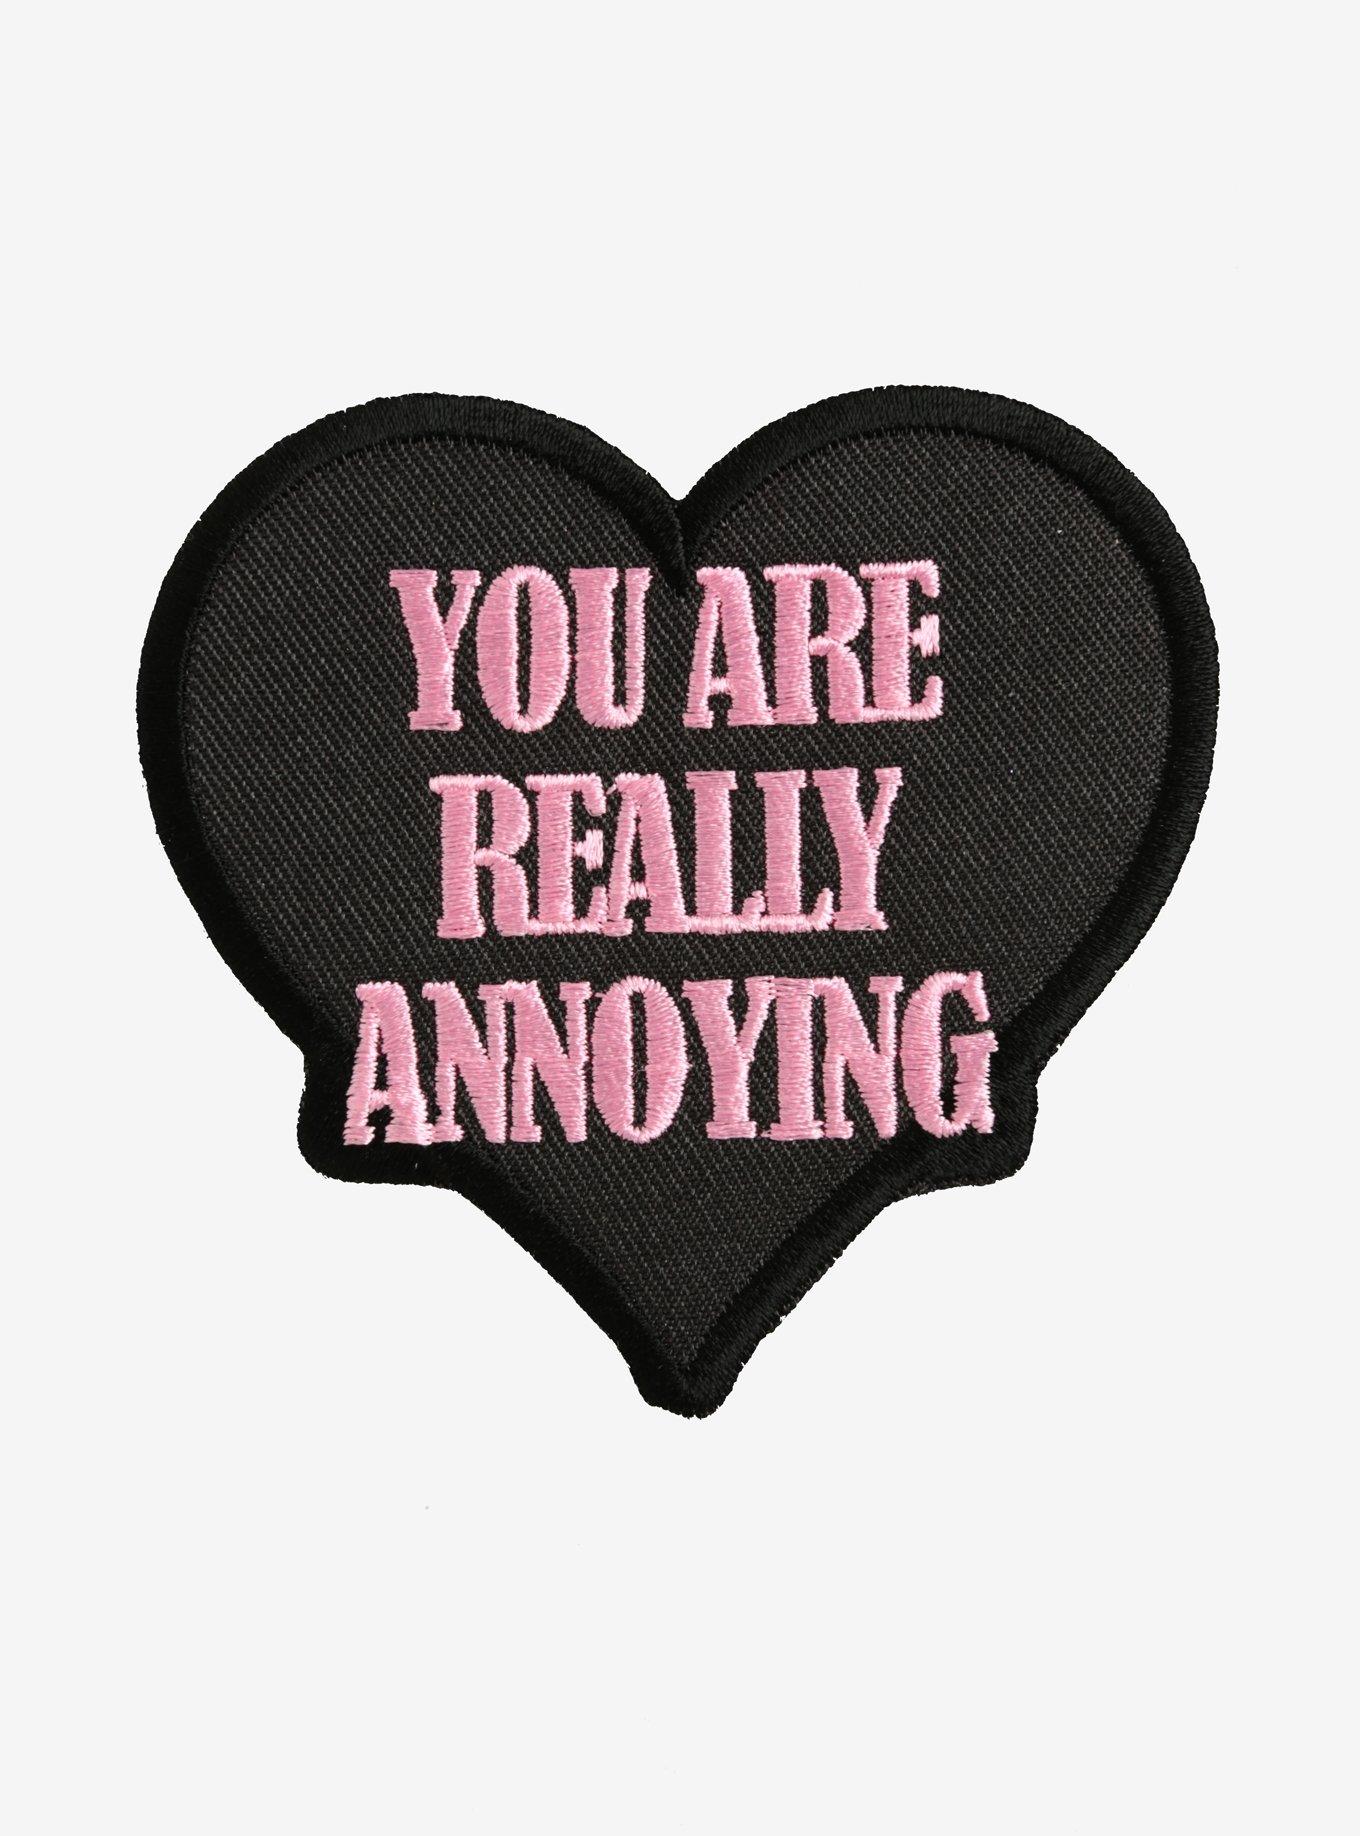 Really Annoying Heart Patch, , hi-res